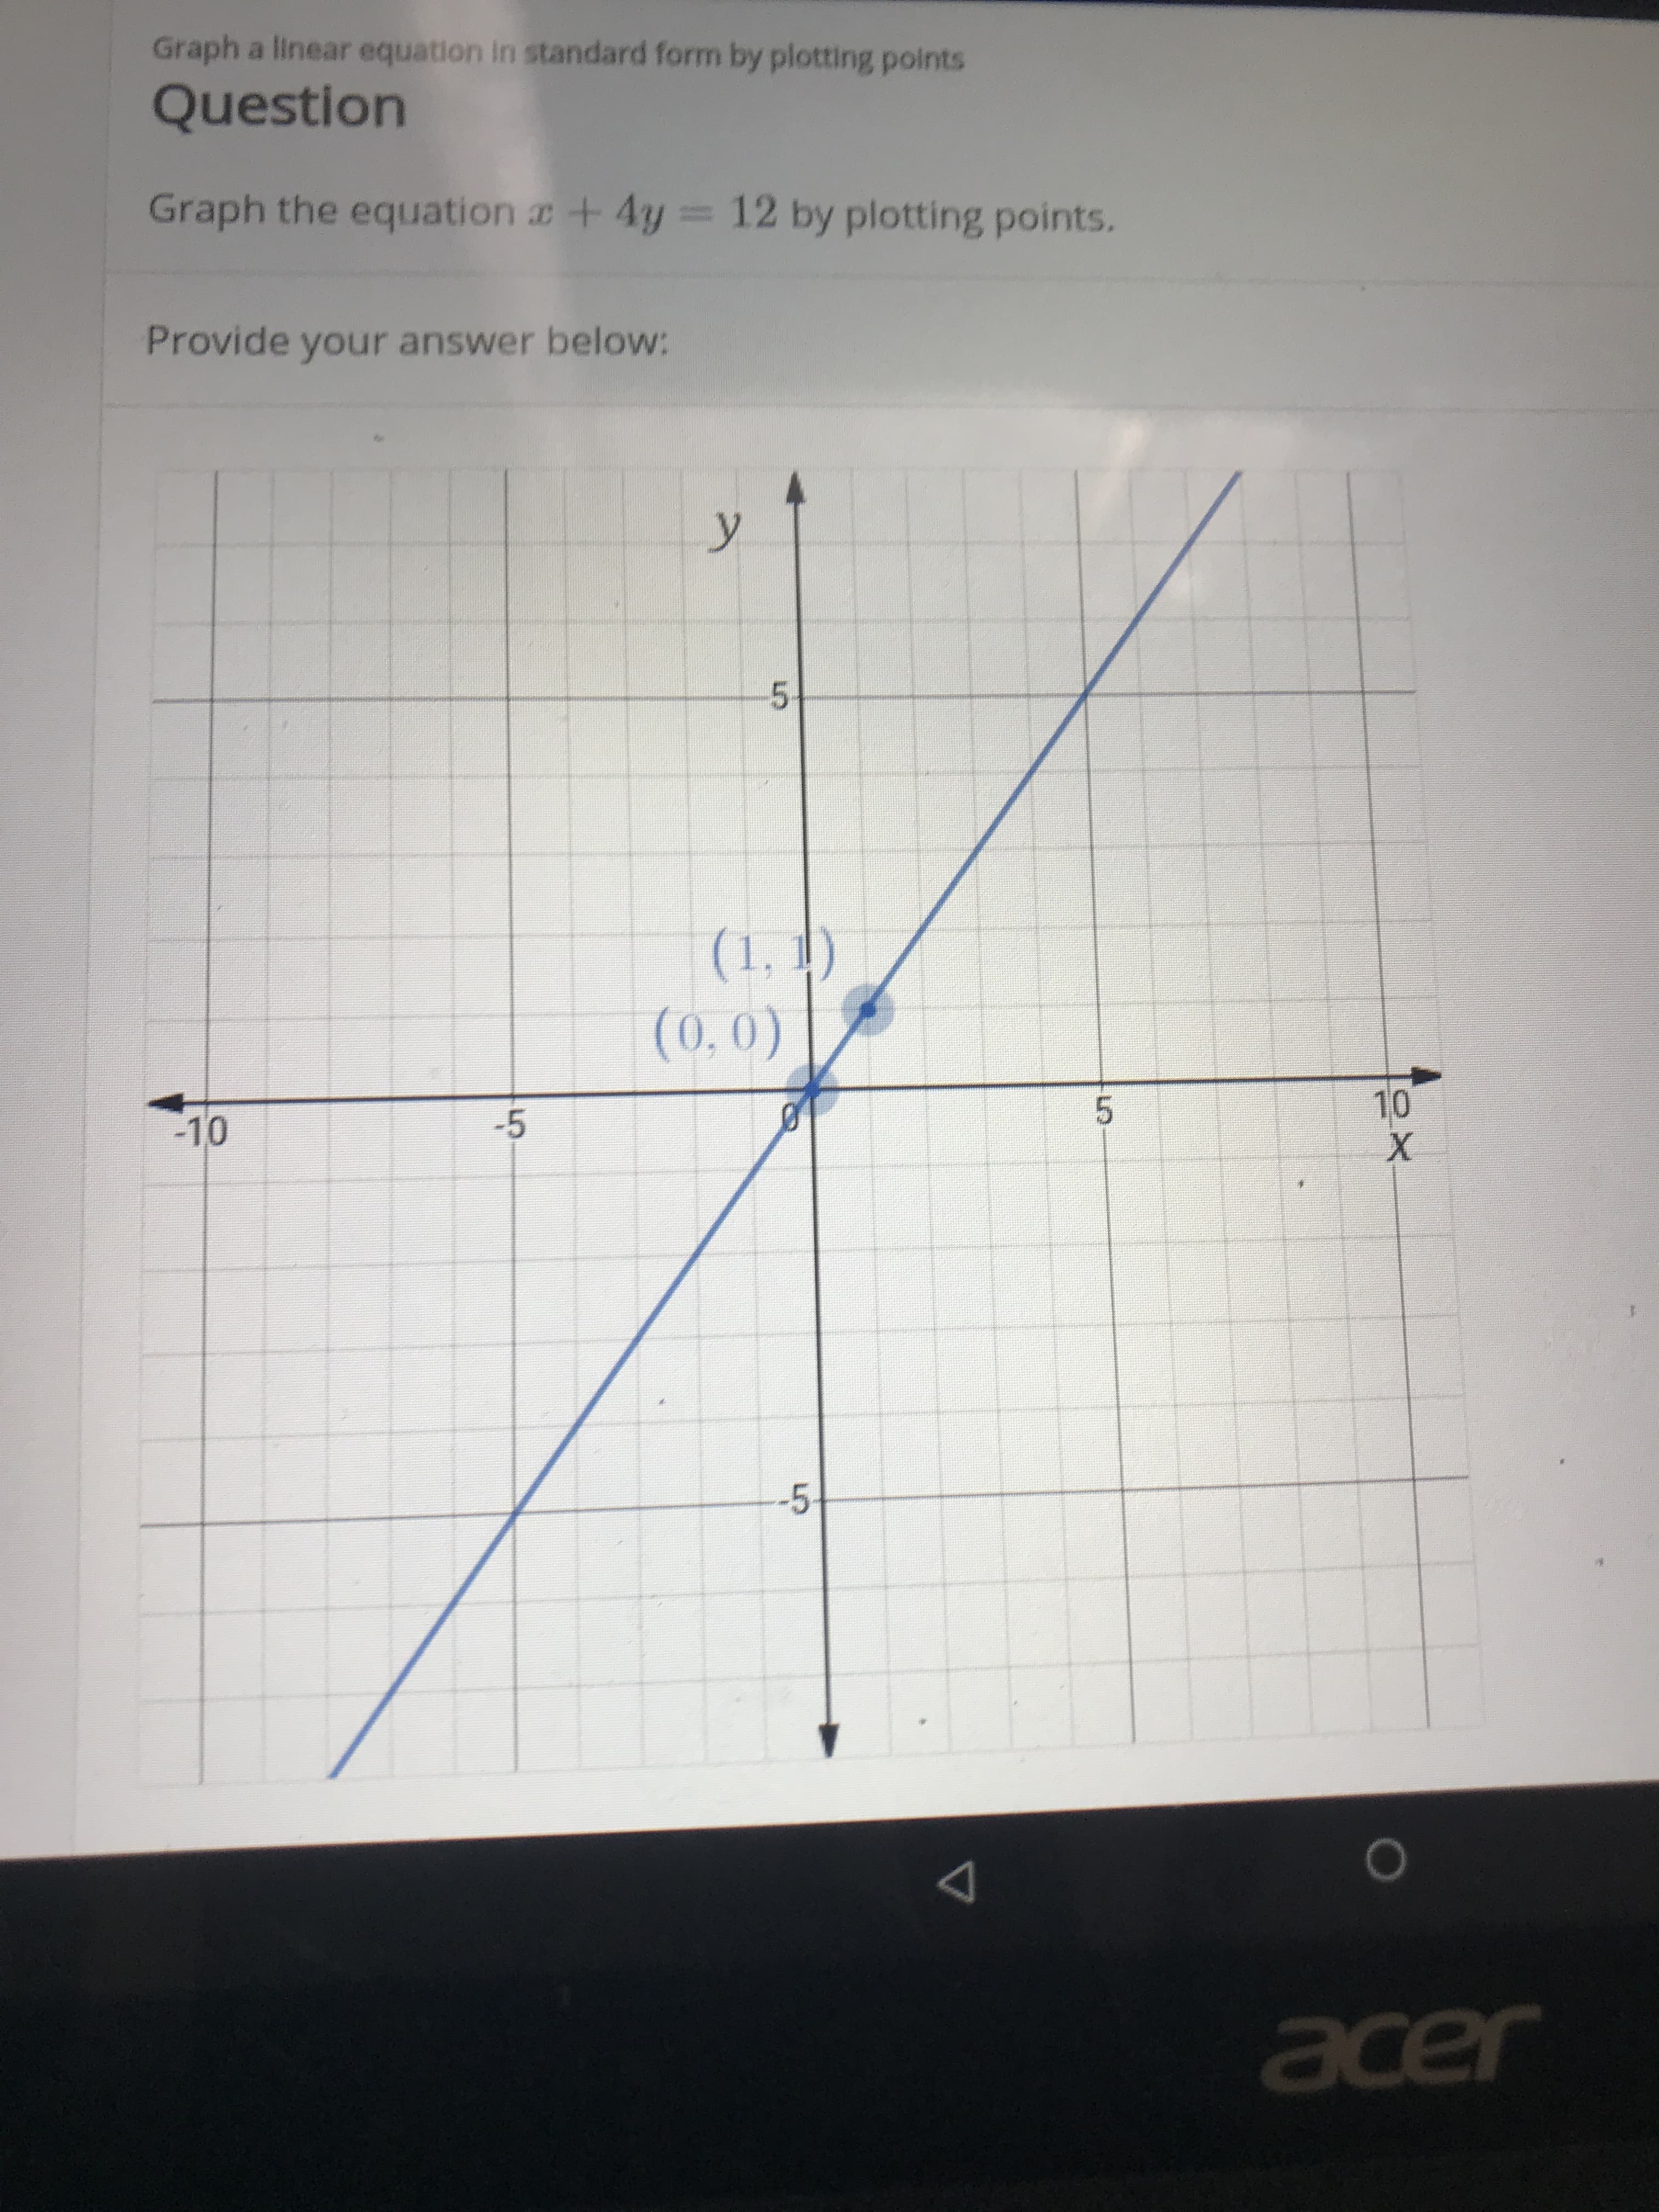 Graph a linear equation in standard form by plotting points
Question
Graph the equation +4y
12 by plotting points.
Provide your answer below:
y
5
(1,1)
(0,0)
10
X
5
-5
-10
-5
acer
